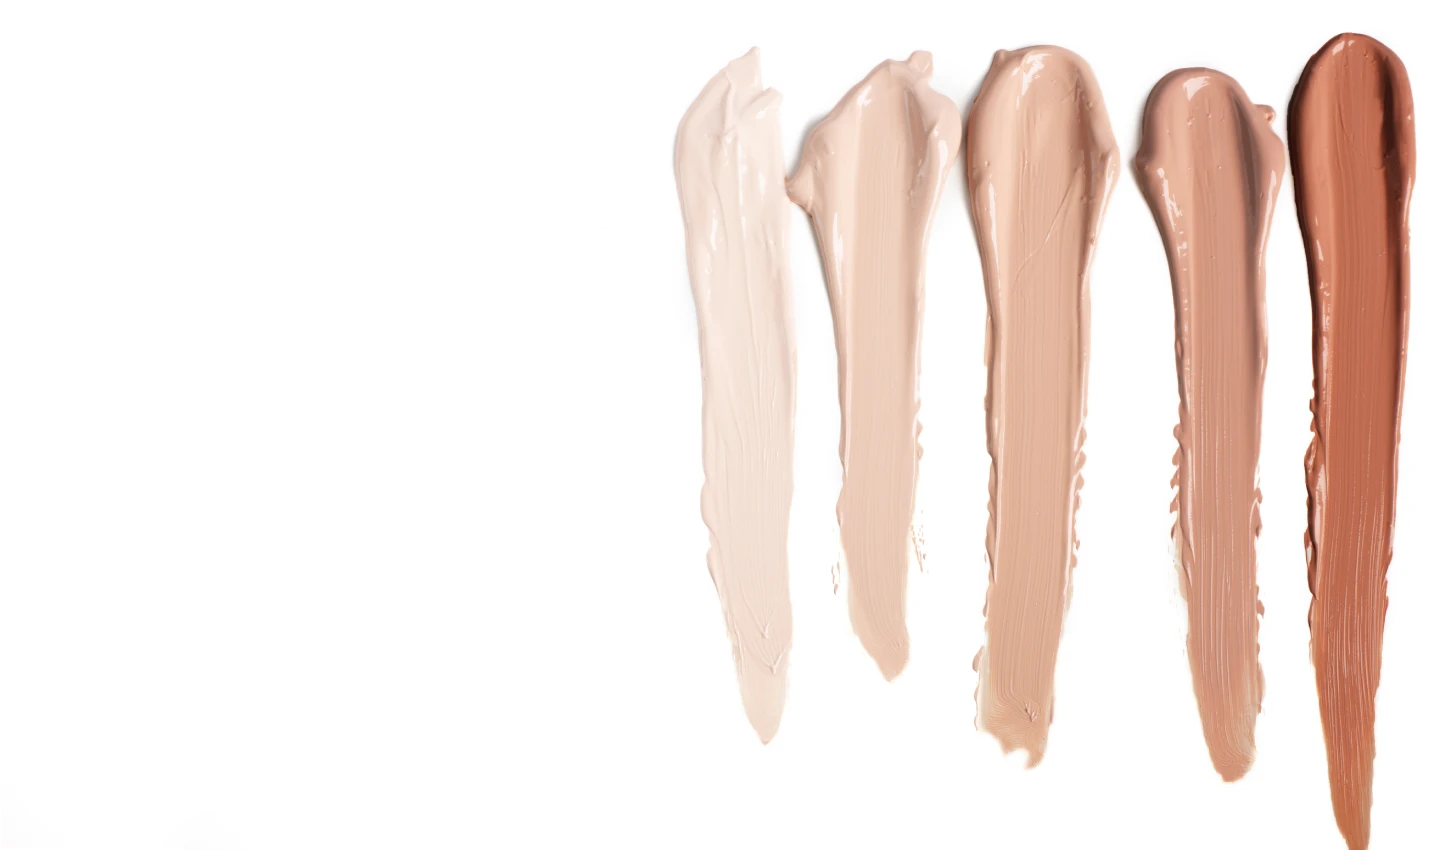 A selection of foundation shades in various colors and undertones, representing the importance of matching foundation undertones for a perfect complexion.